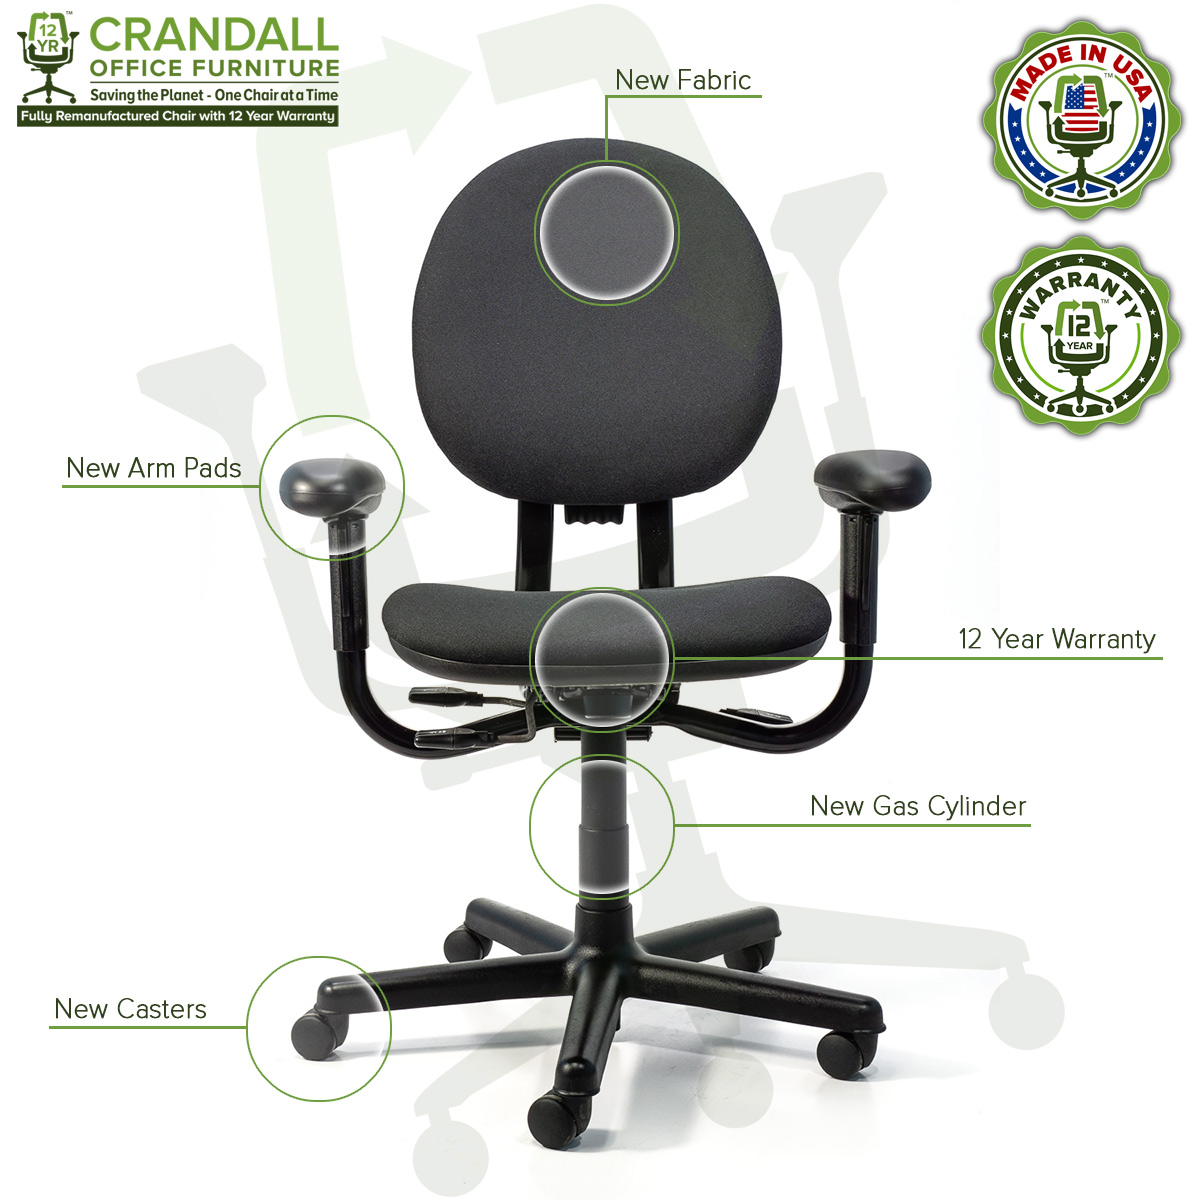 Crandall Office Furniture Remanufactured Steelcase Criterion Chair with 12 Year Warranty - 09